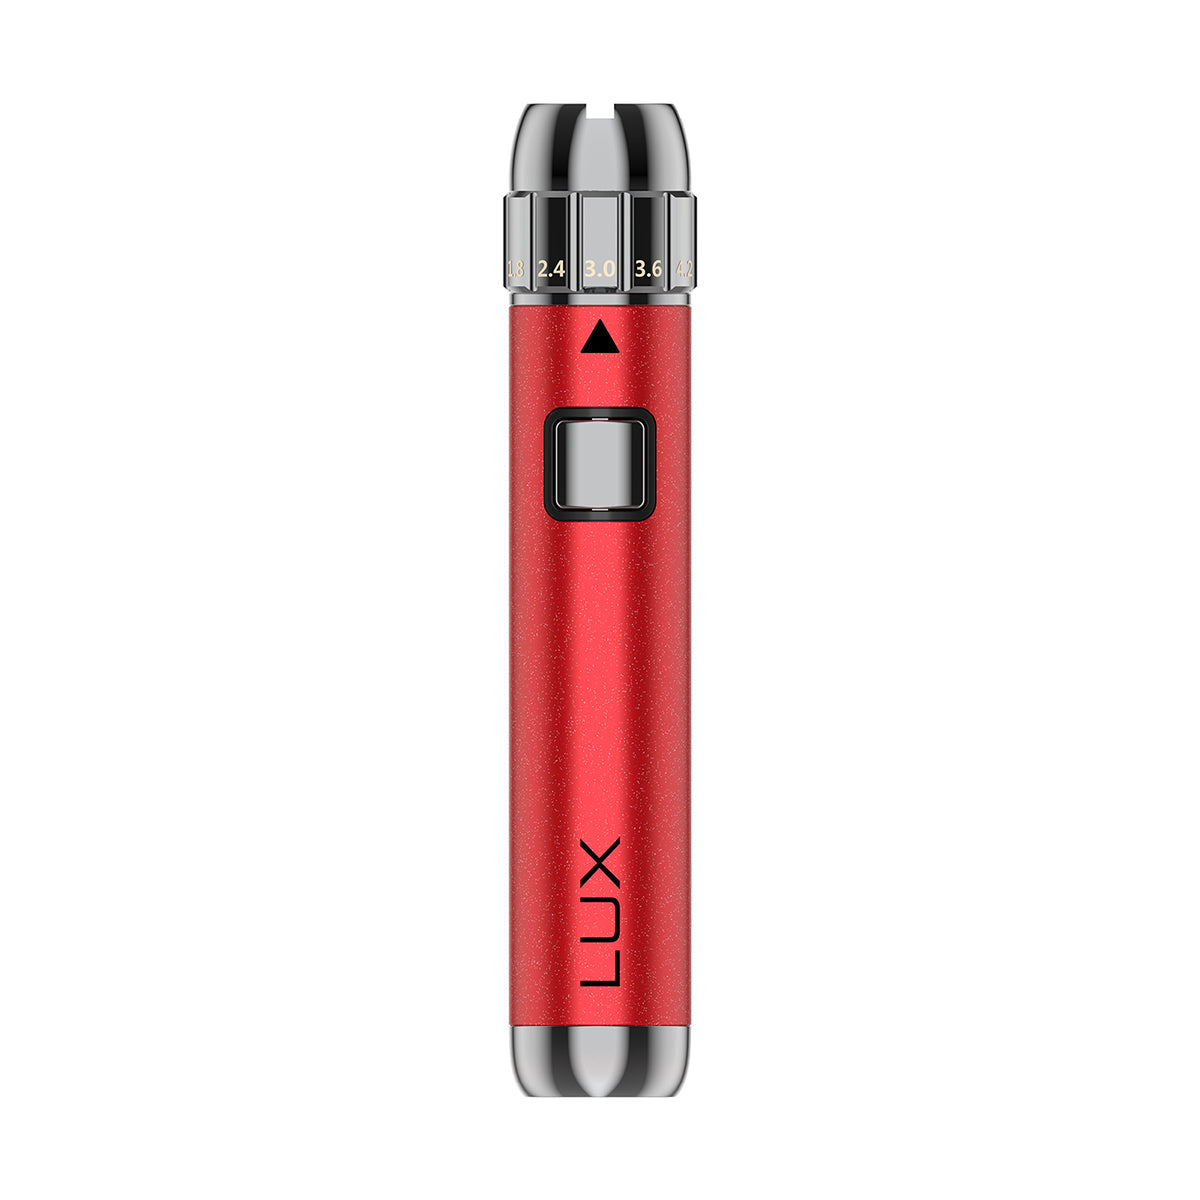 Yocan LUX Cartridge Battery Vaporizers Yocan Classic Red 